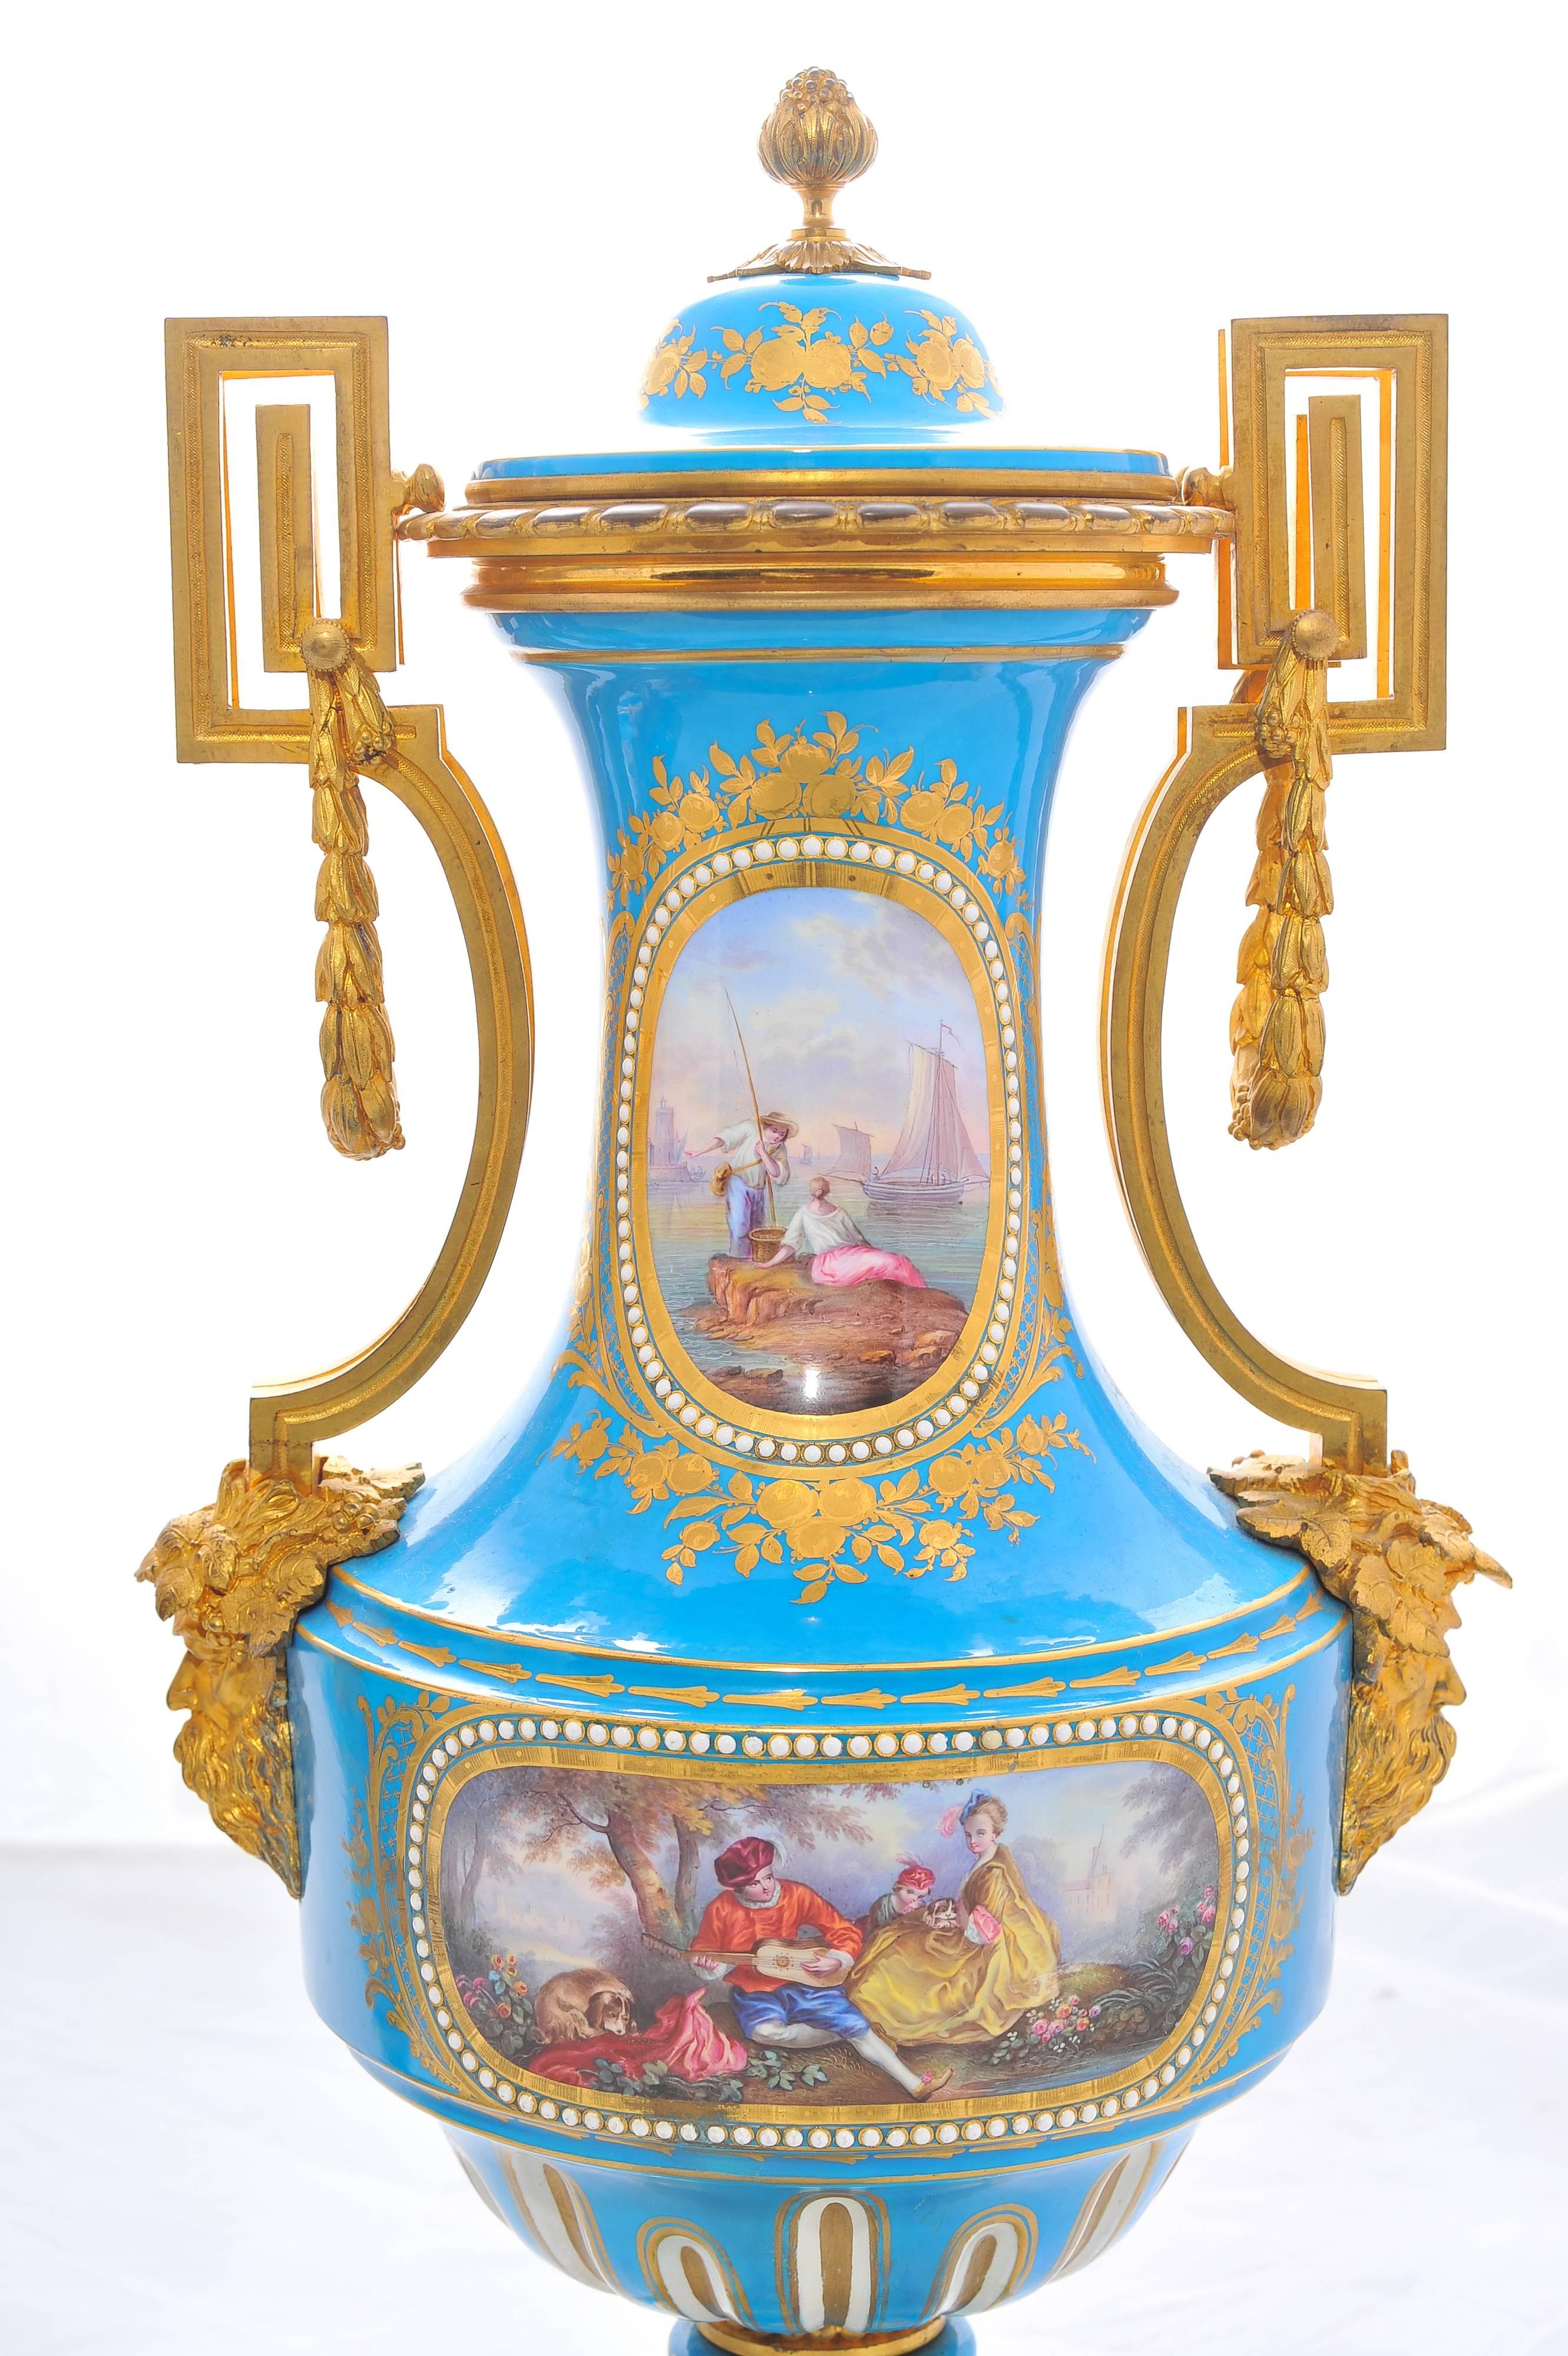 A very good quality pair of 19th century lidded 'Sevres' porcelain lidded vases. Each having wonderful gilded ormolu mounts. Classical hand-painted scenes set on a Turquoise back ground with golf leaf and raised on ormolu bases.